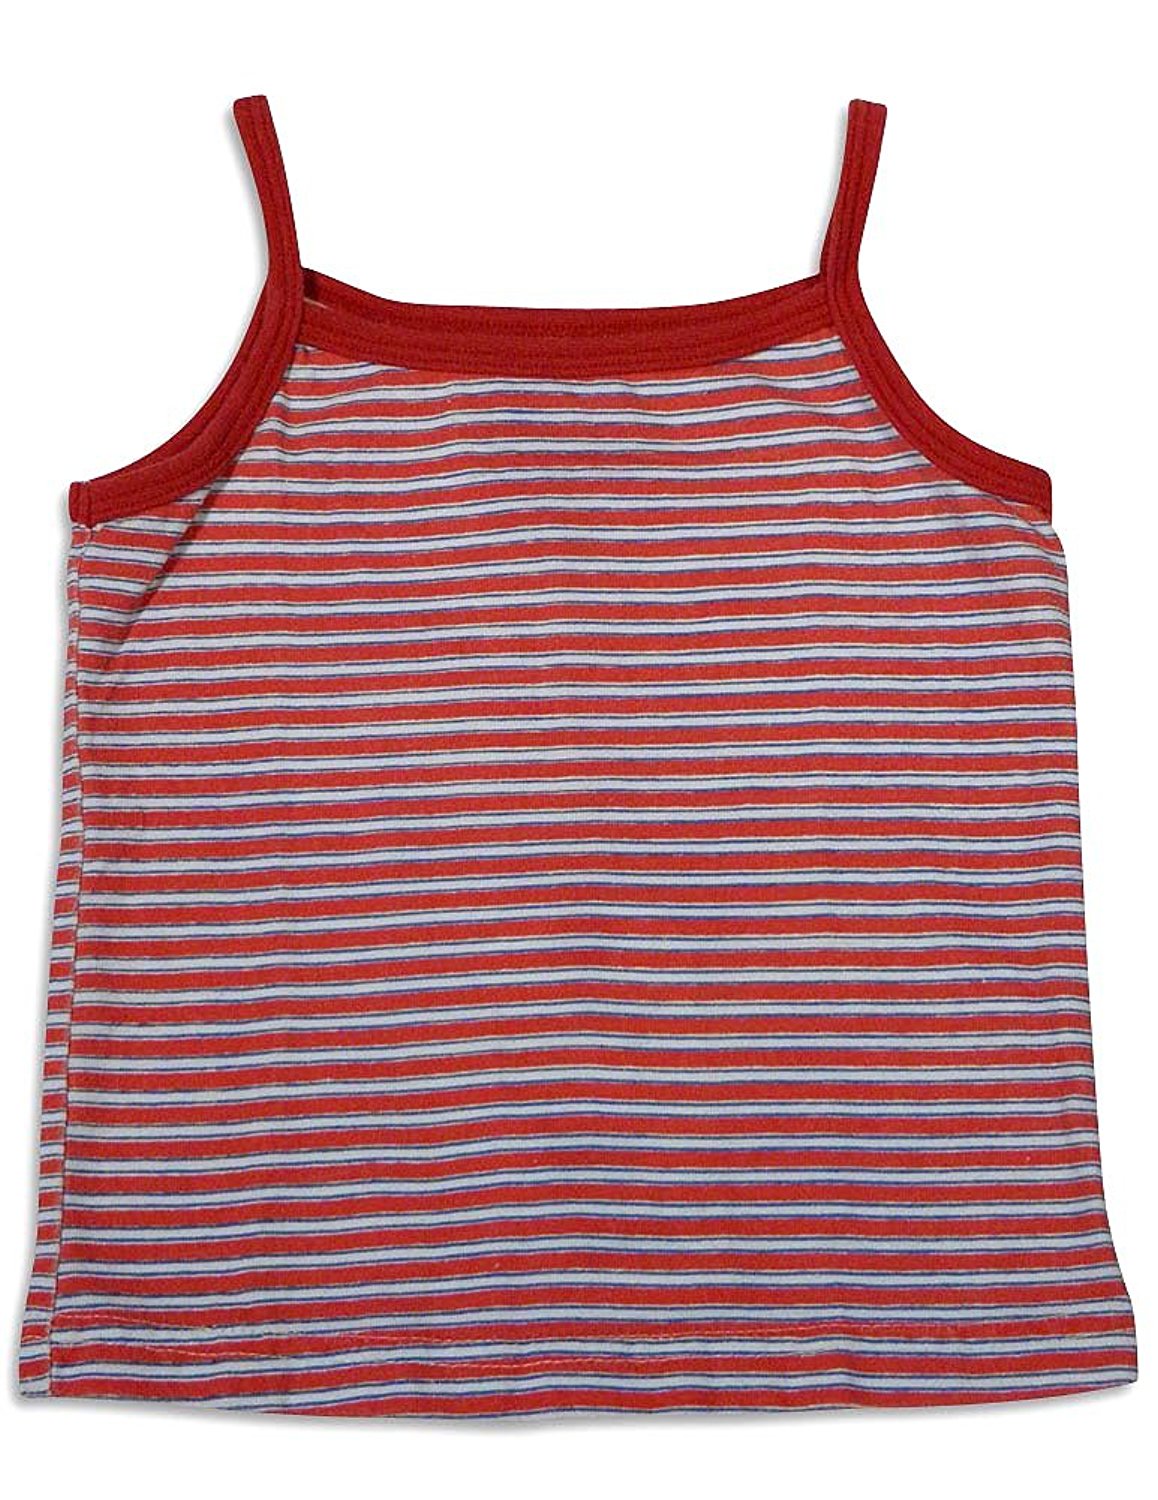 Gold Rush Outfitters - Little Girls Tank Top - ShopBCClothing